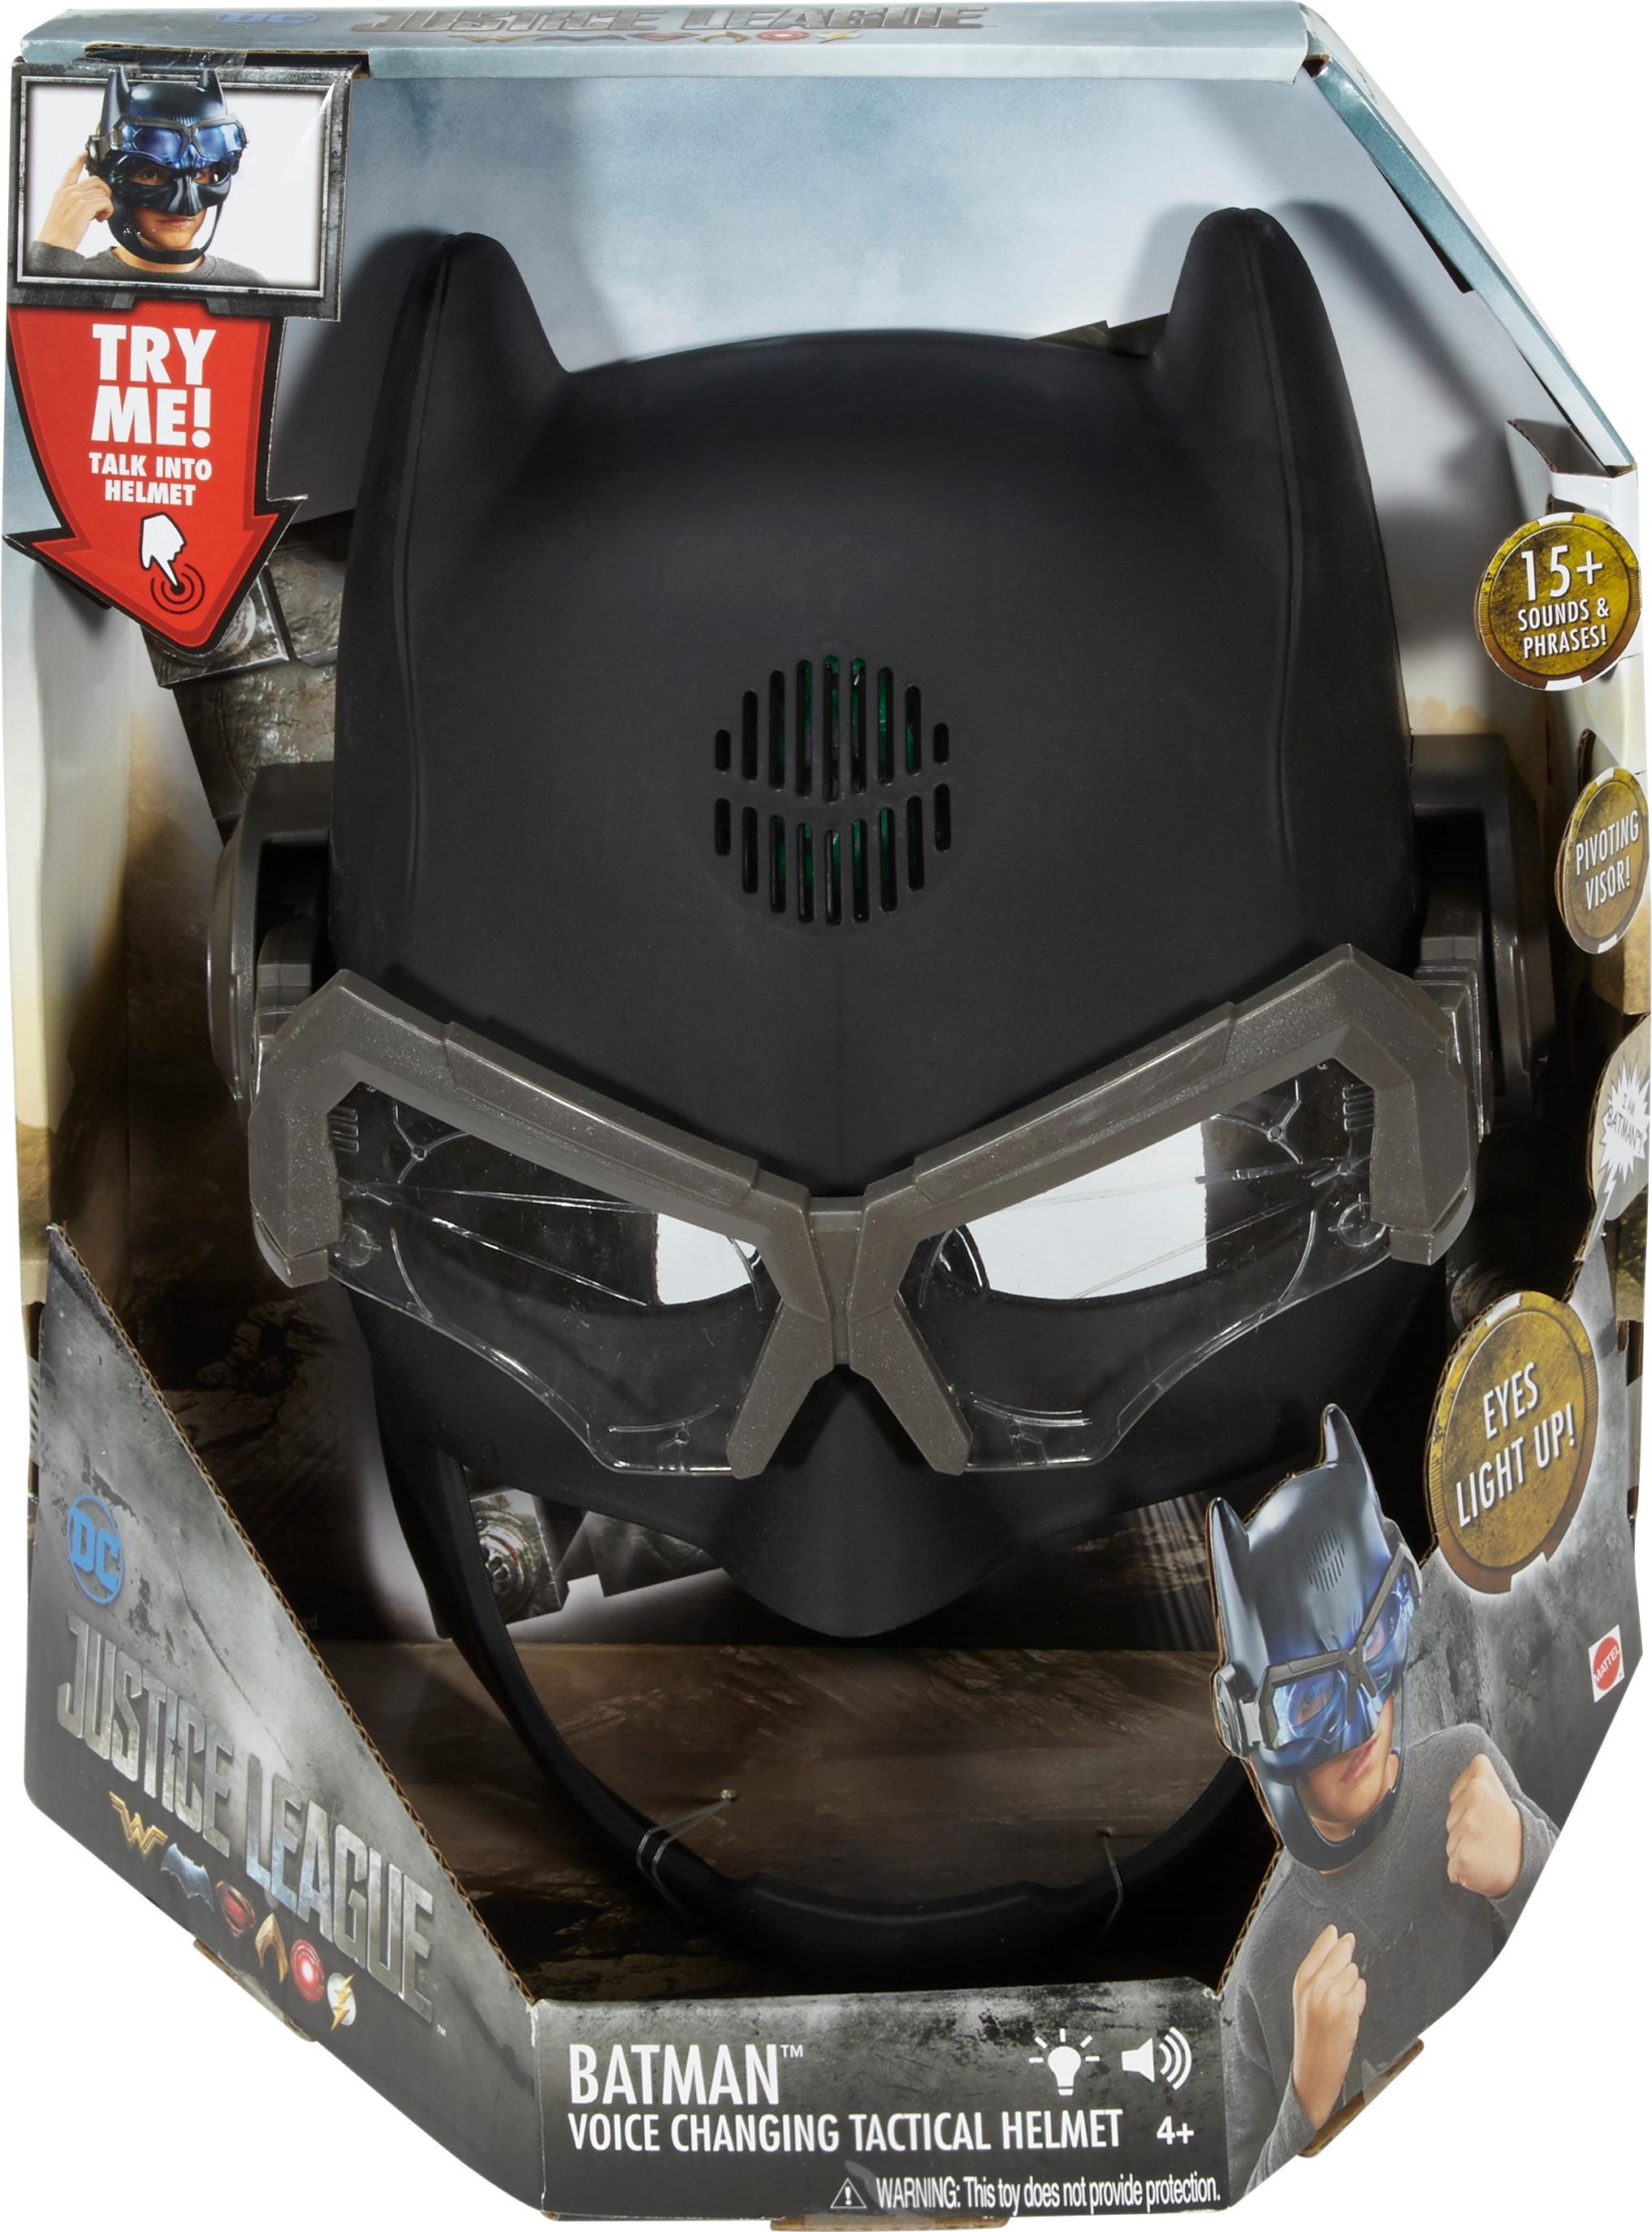 Batman Voice Changing Mask With Over 15 Sounds for Kids Aged 4 and up for sale online 